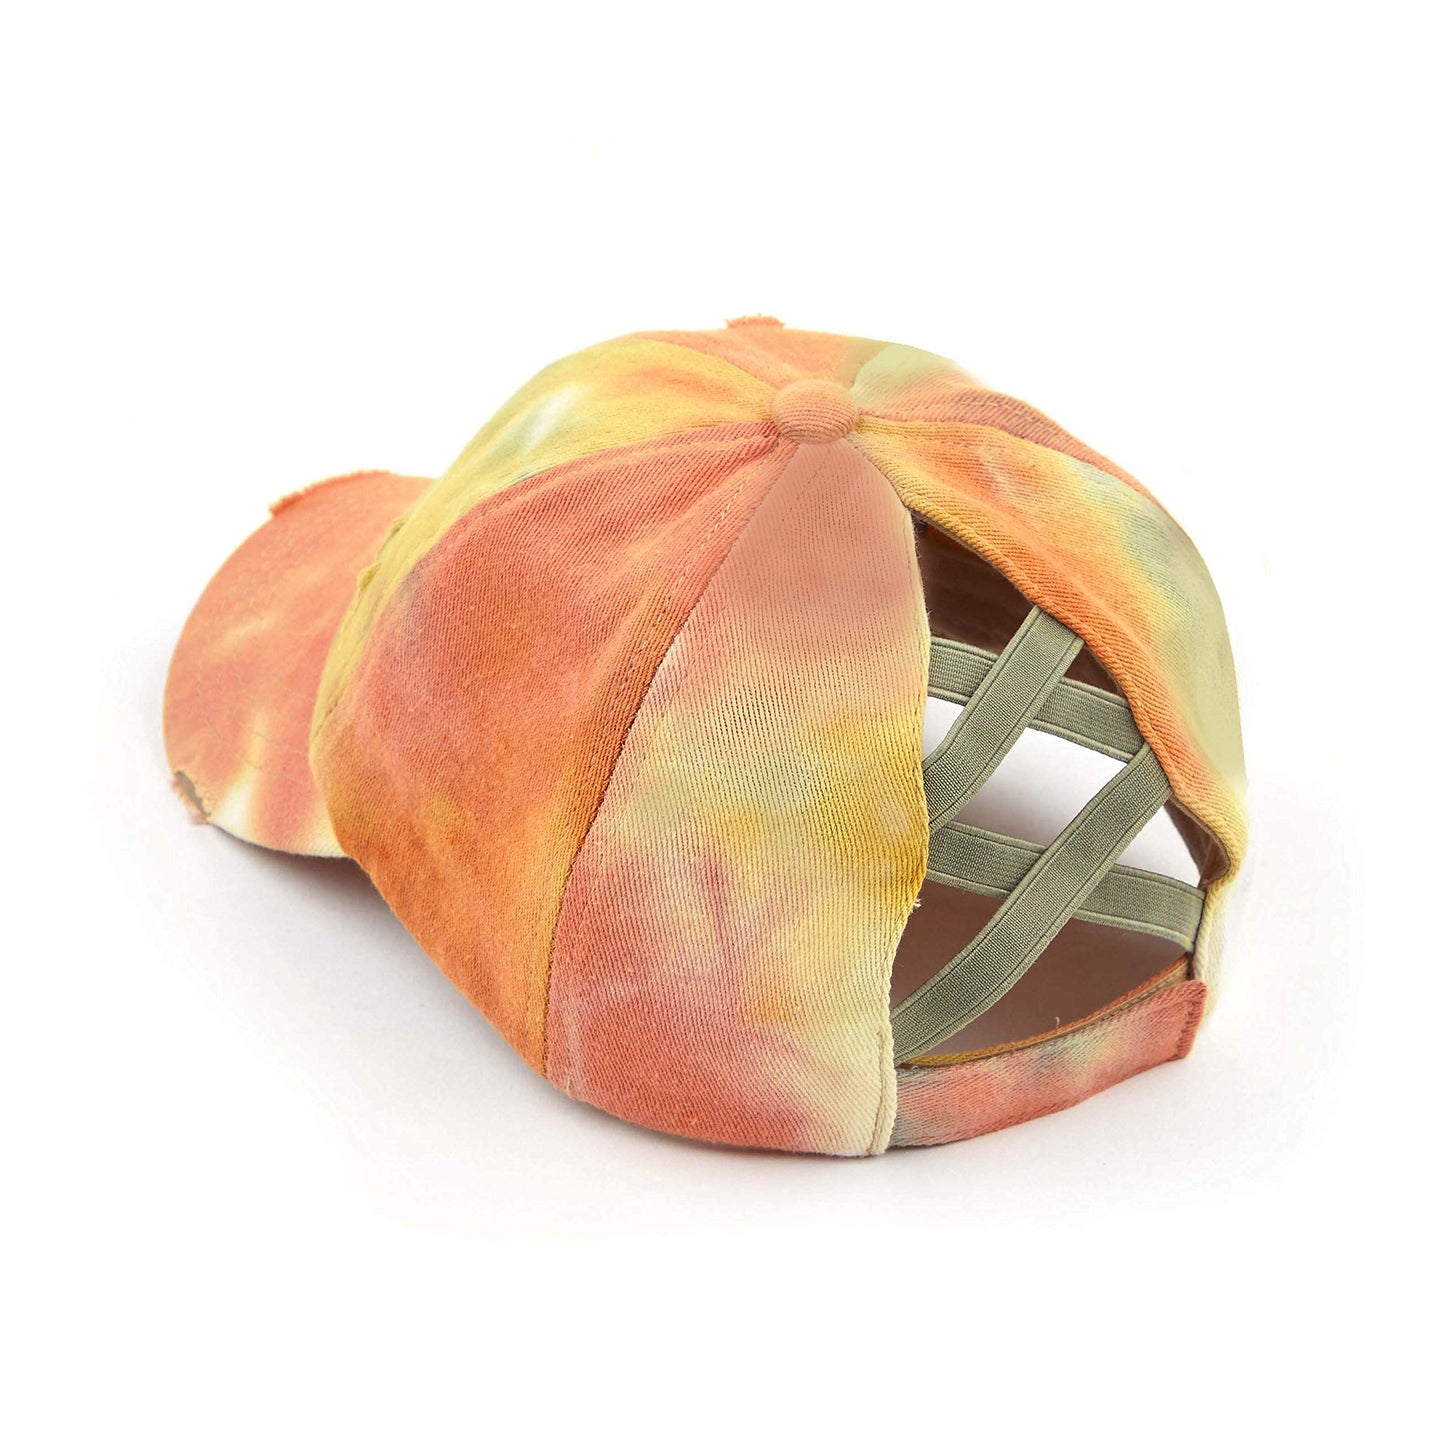 Tie Dye Criss Cross Ponytail Hat by Funky Junque